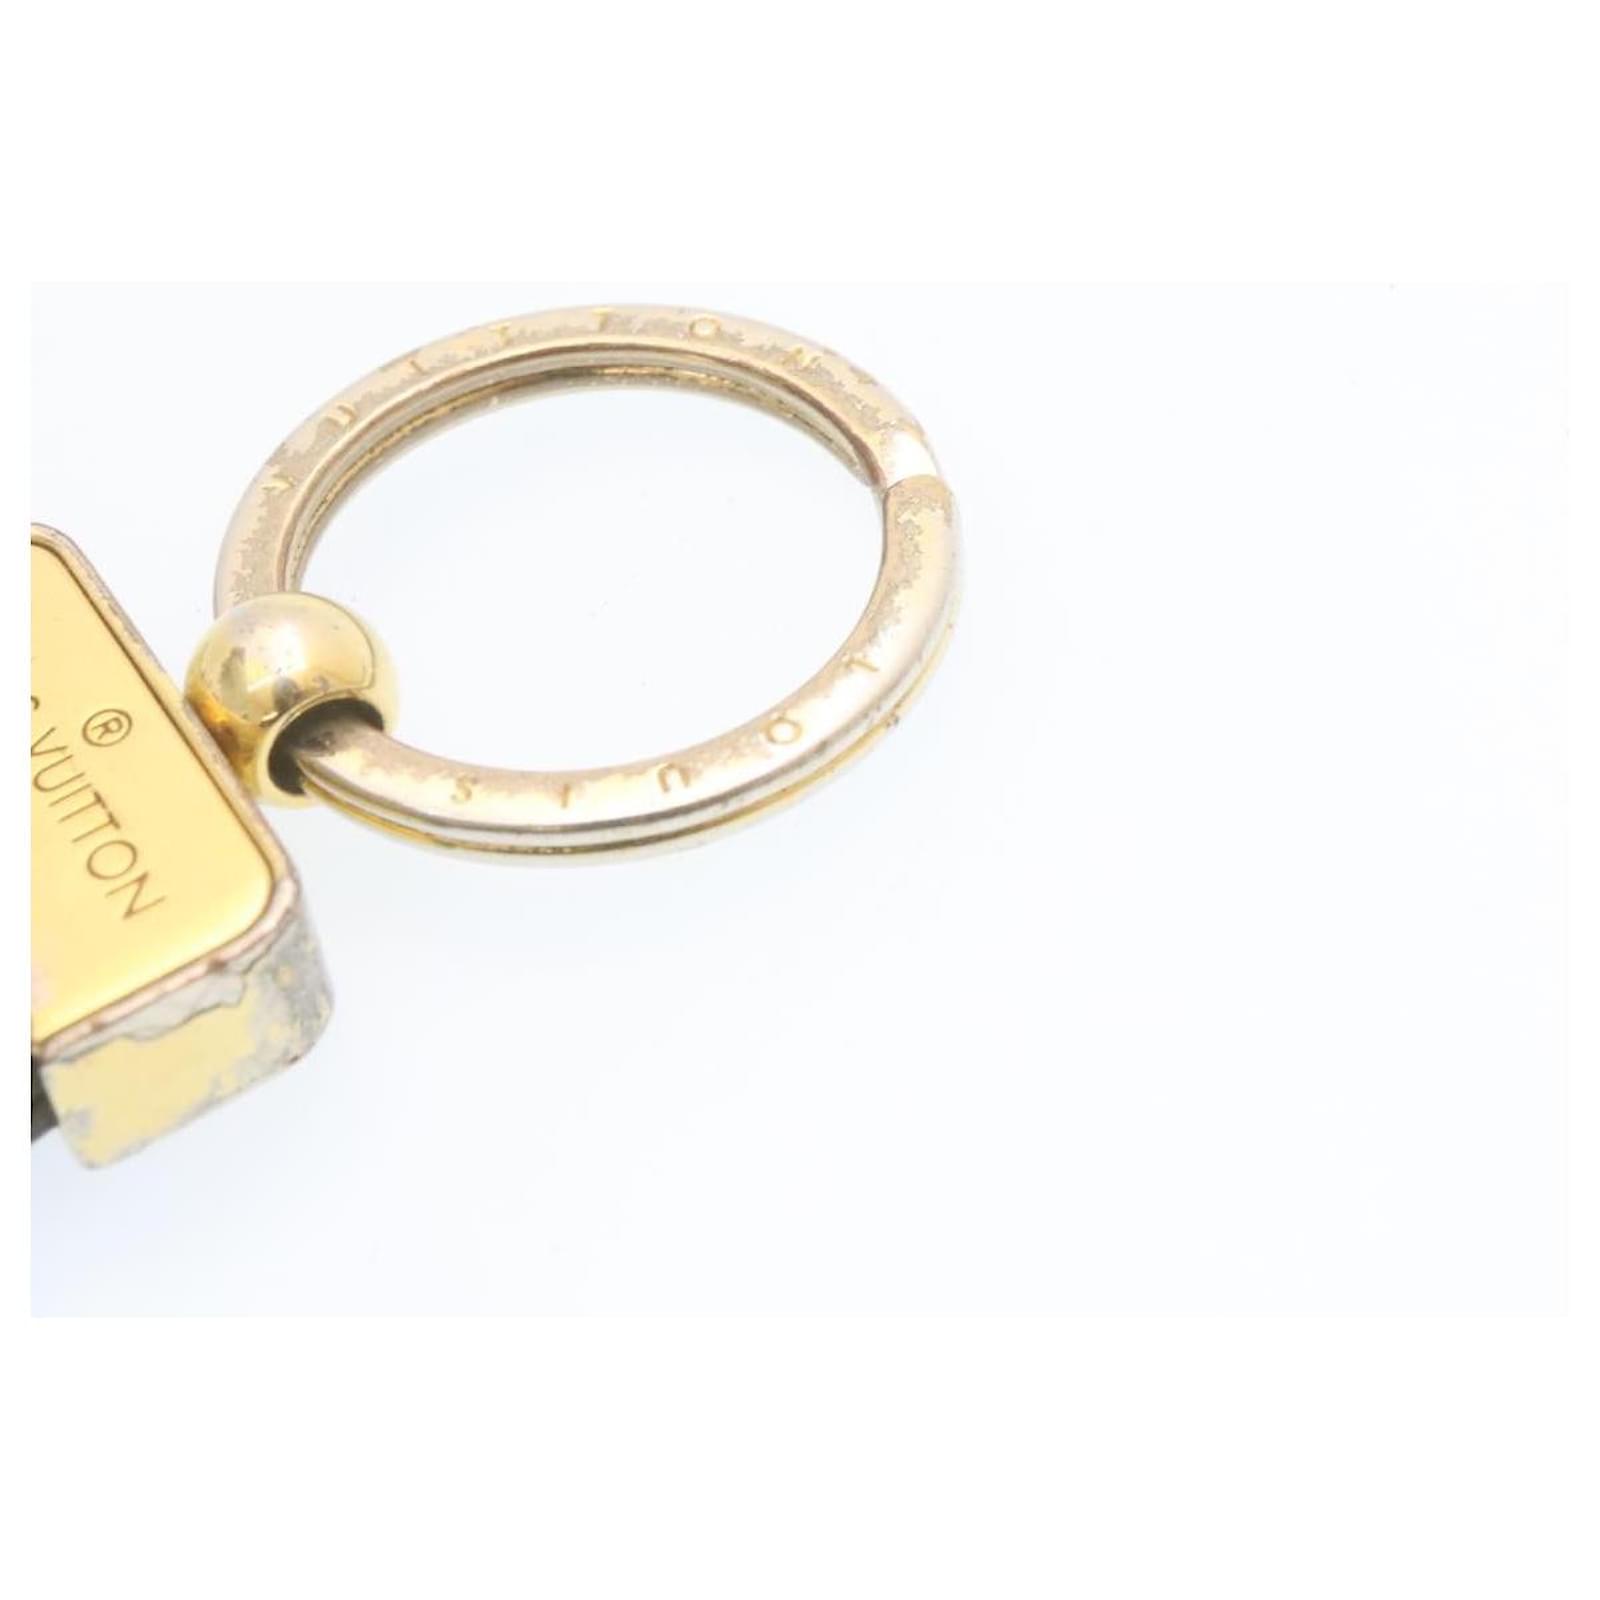 LOUIS VUITTON Portecles Dragonne key holder ring M65221｜Product  Code：2107600675404｜BRAND OFF Online Store